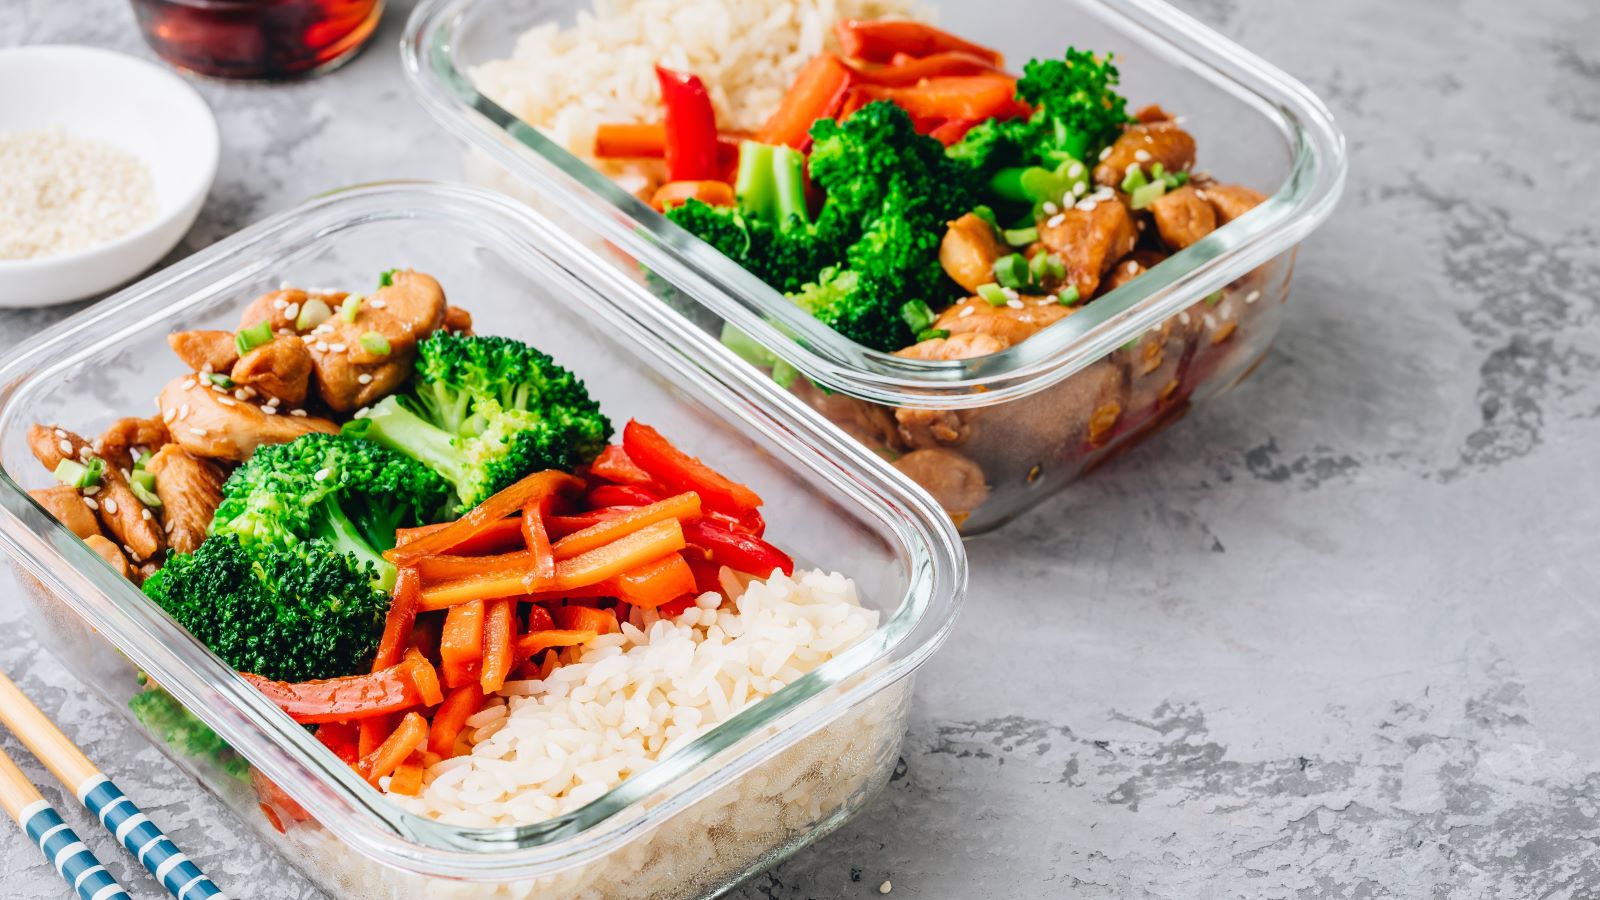 If meal prep seems like a great idea every Friday but too much work come Sunday, you’re not alone. Here are eight tips from a dietitian.